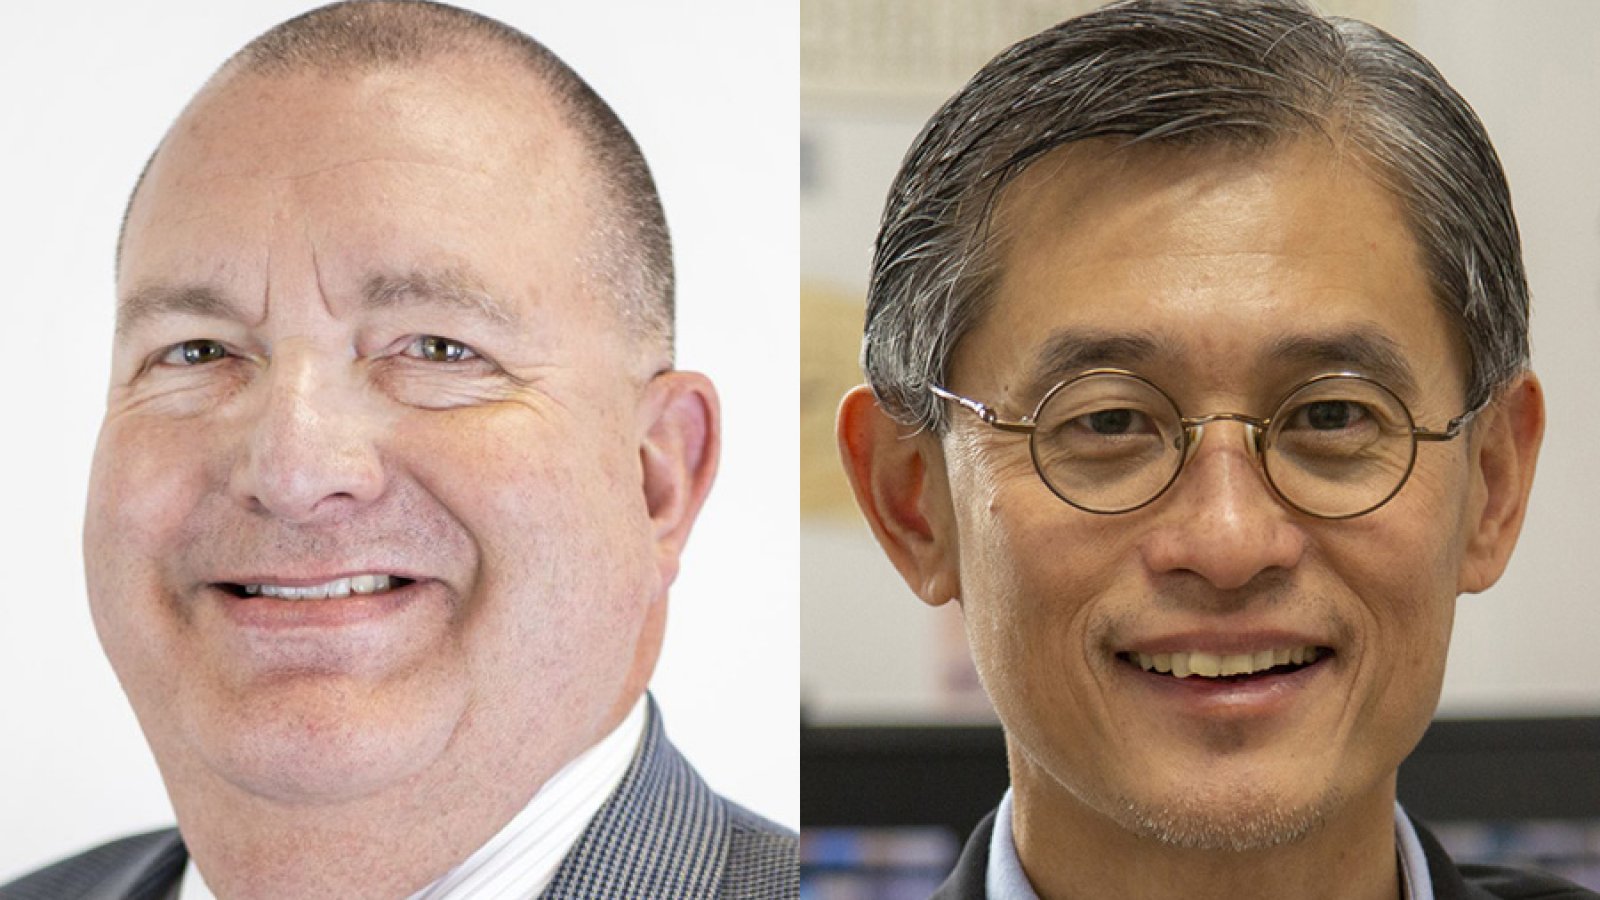 Ronald Faller (left), Willa Cather research professor at Midwest Roadside Safety Facility, and Leen-Kiat Soh, Charles Bessey professor in the School of Computing.